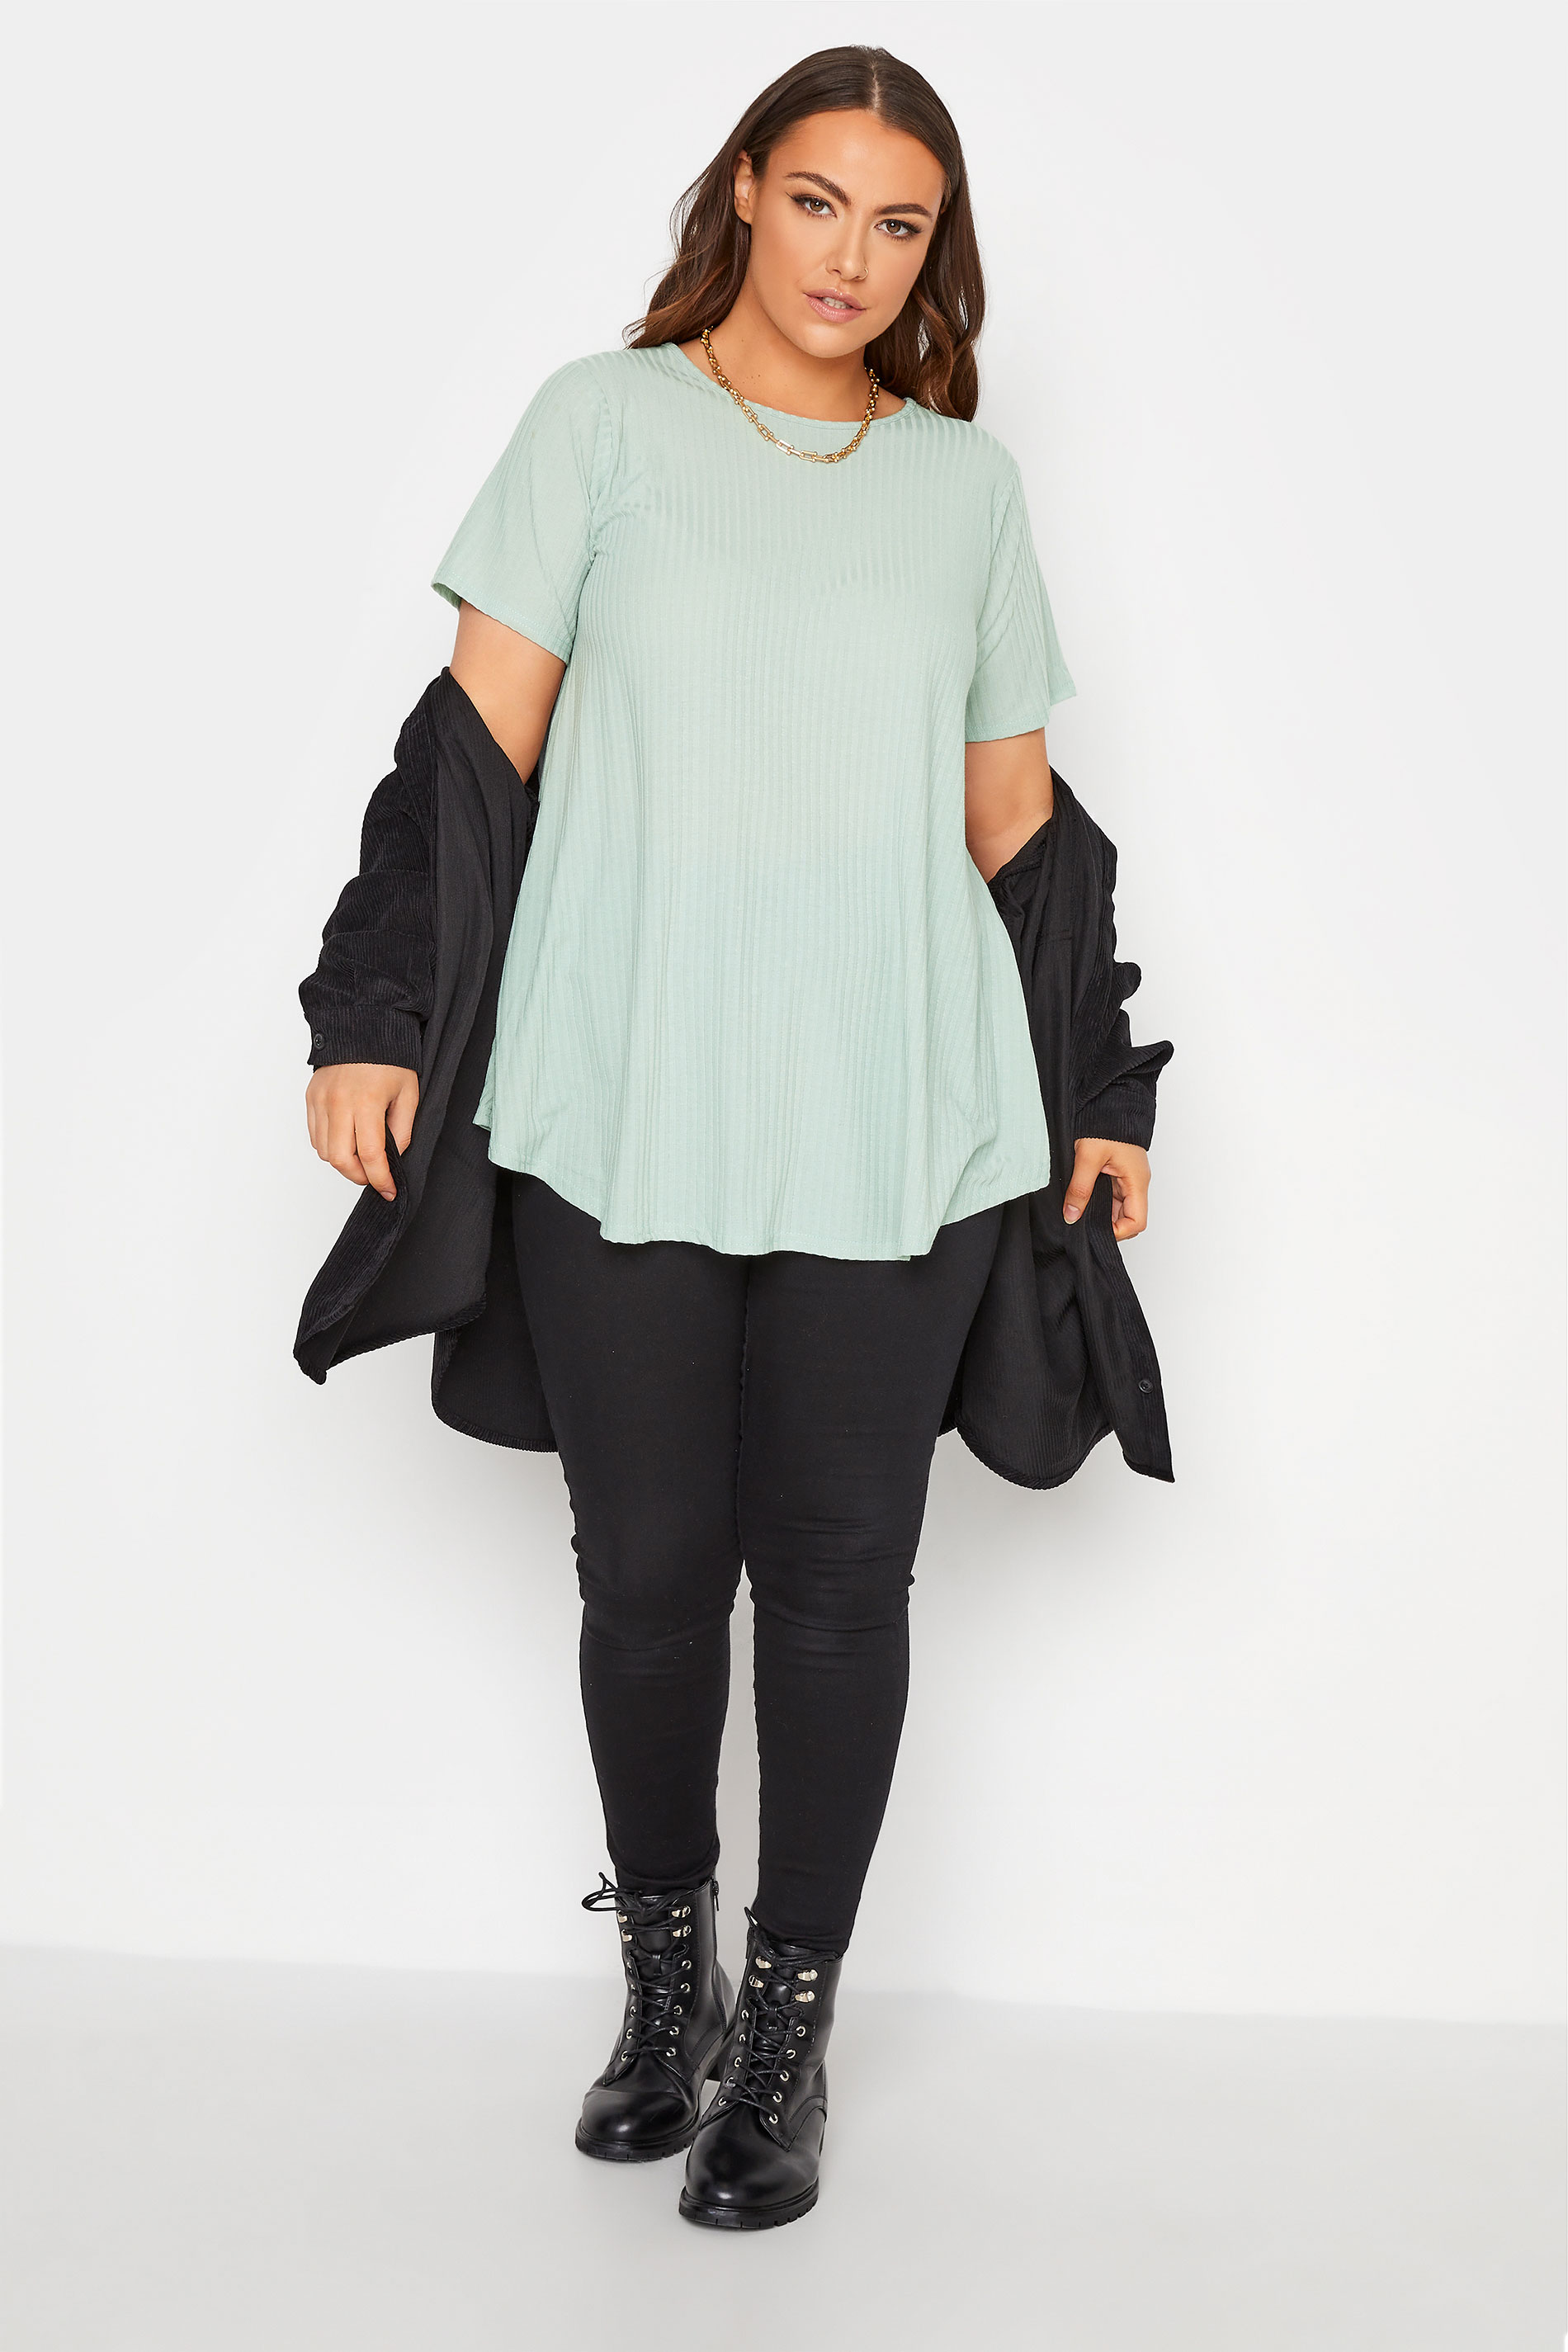 Grande taille  Tops Grande taille  Tops Jersey | LIMITED COLLECTION - Top Vert Menthe Volanté Nervuré - RD65035